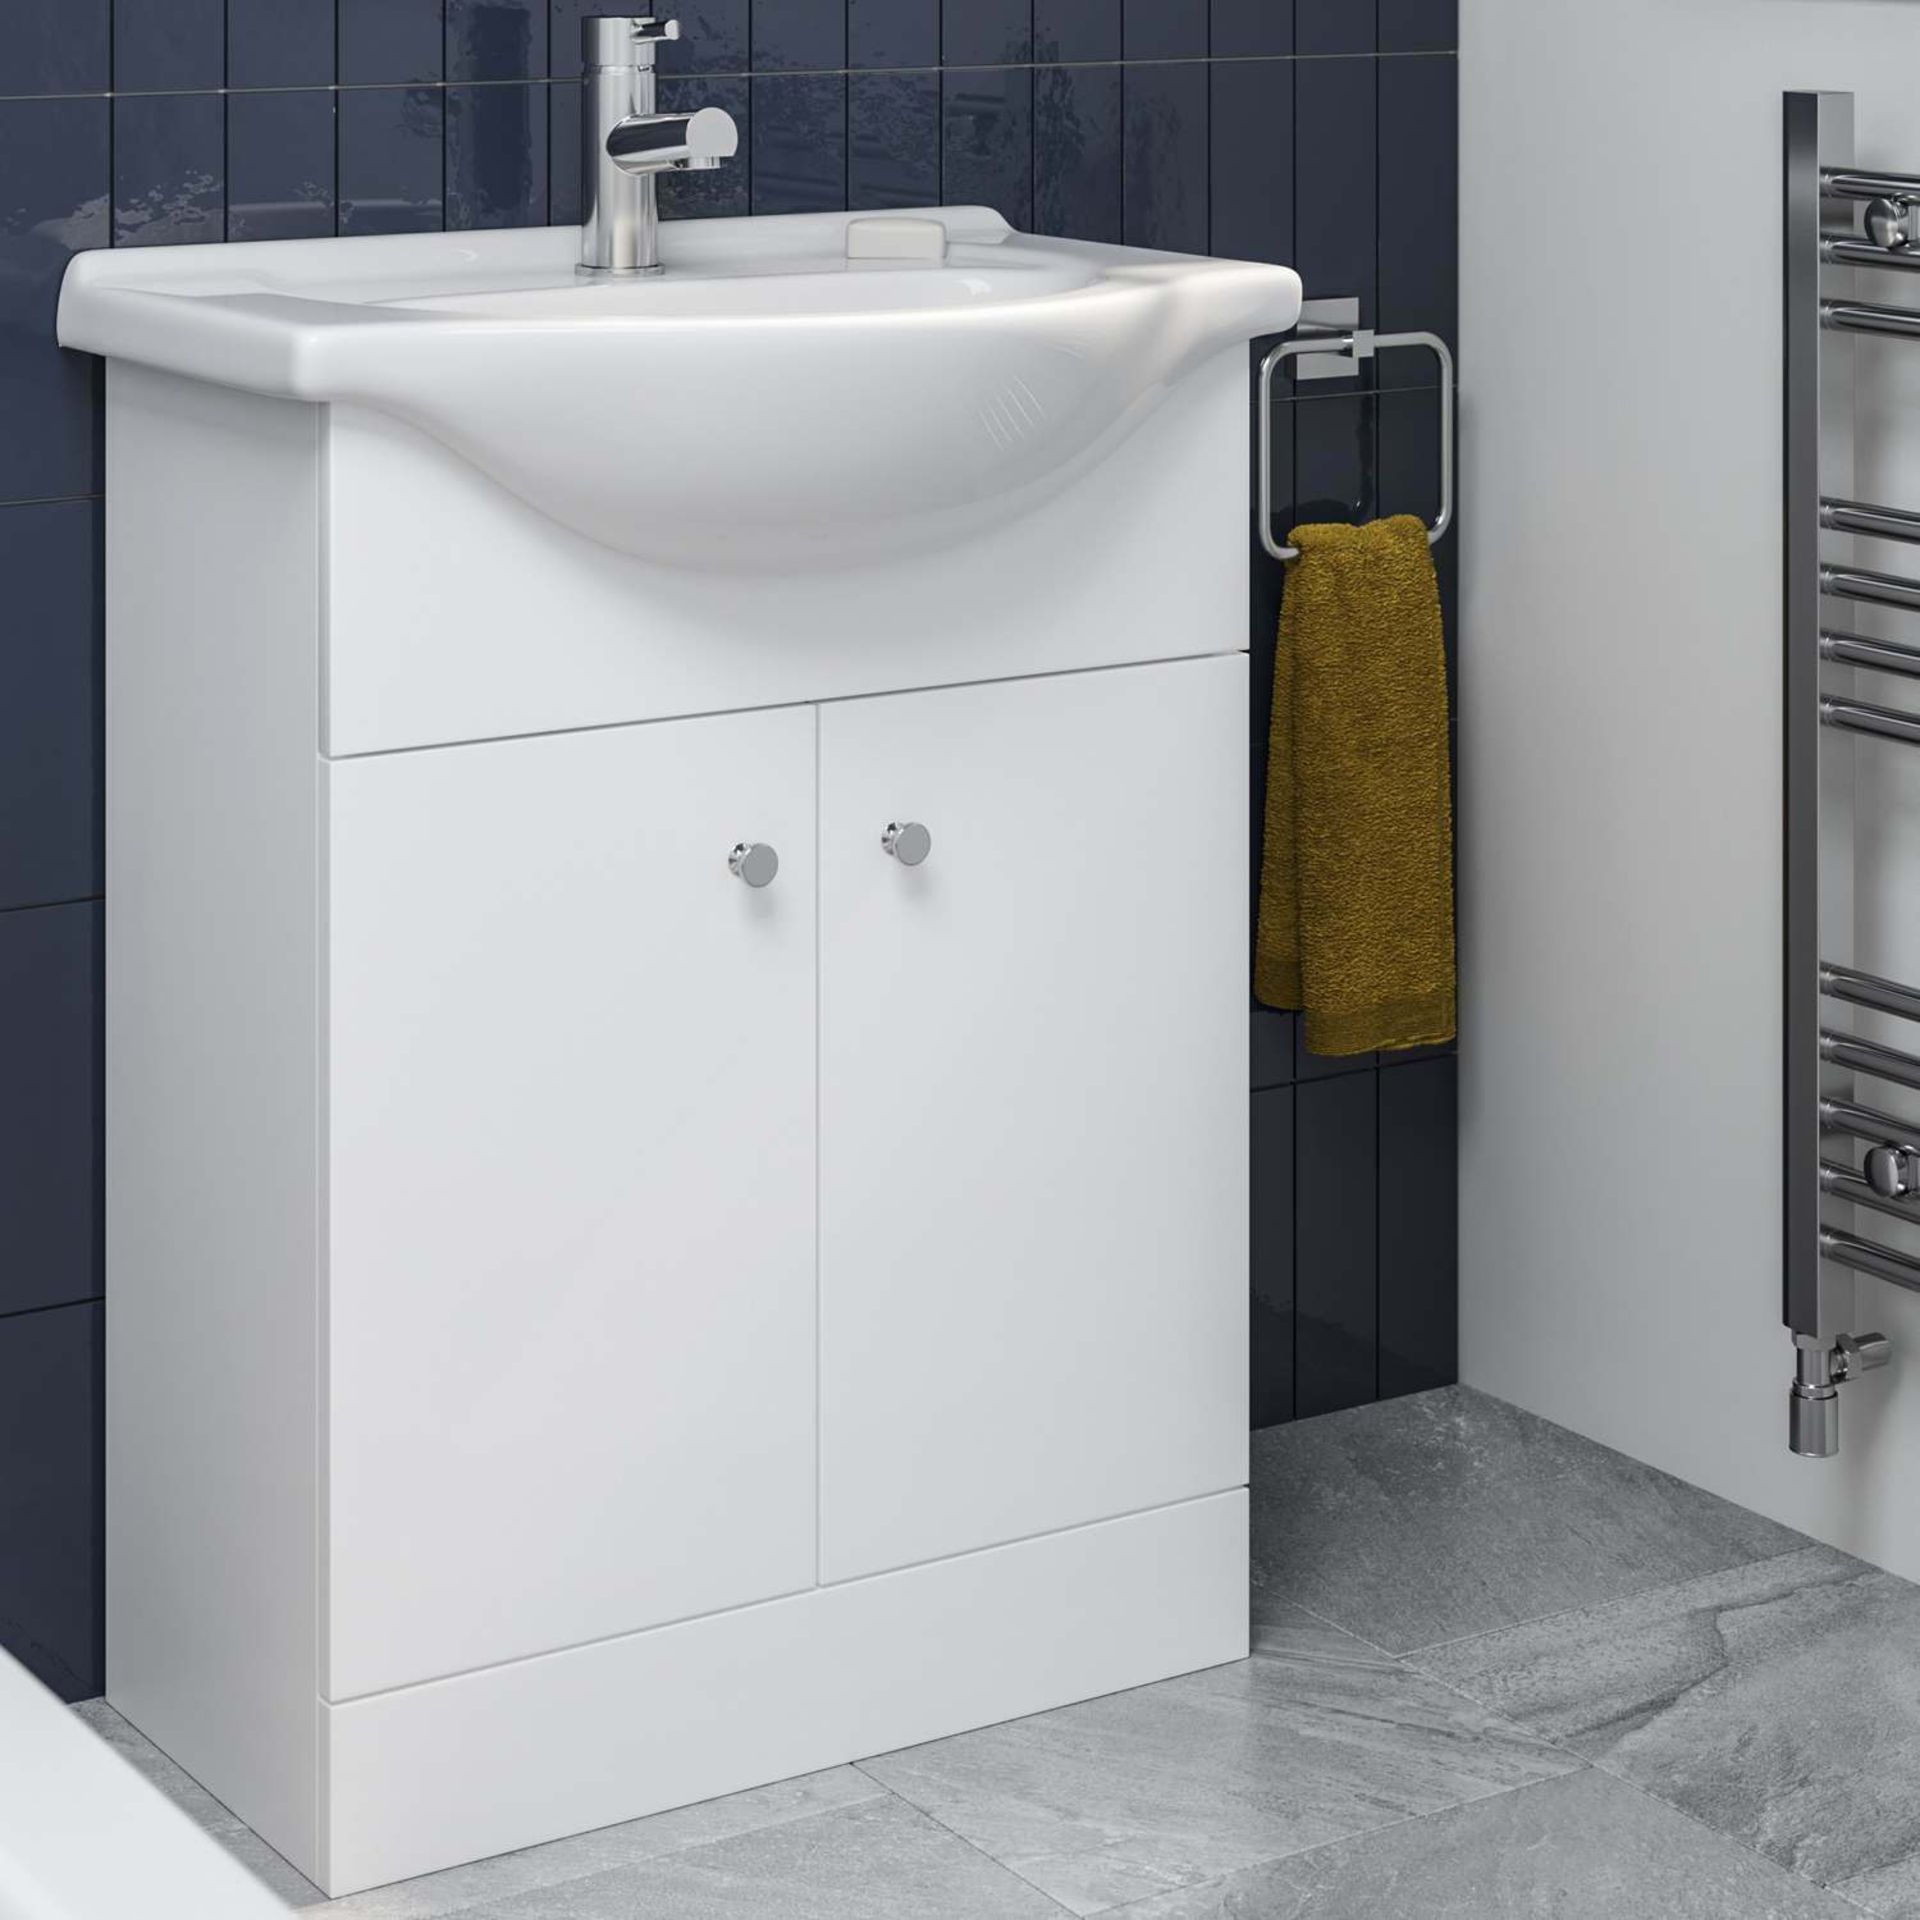 NEW & BOXED 650mm Quartz White Basin Vanity Unit- Floor Standing. RRP £399.99.Comes complete ... - Image 3 of 3